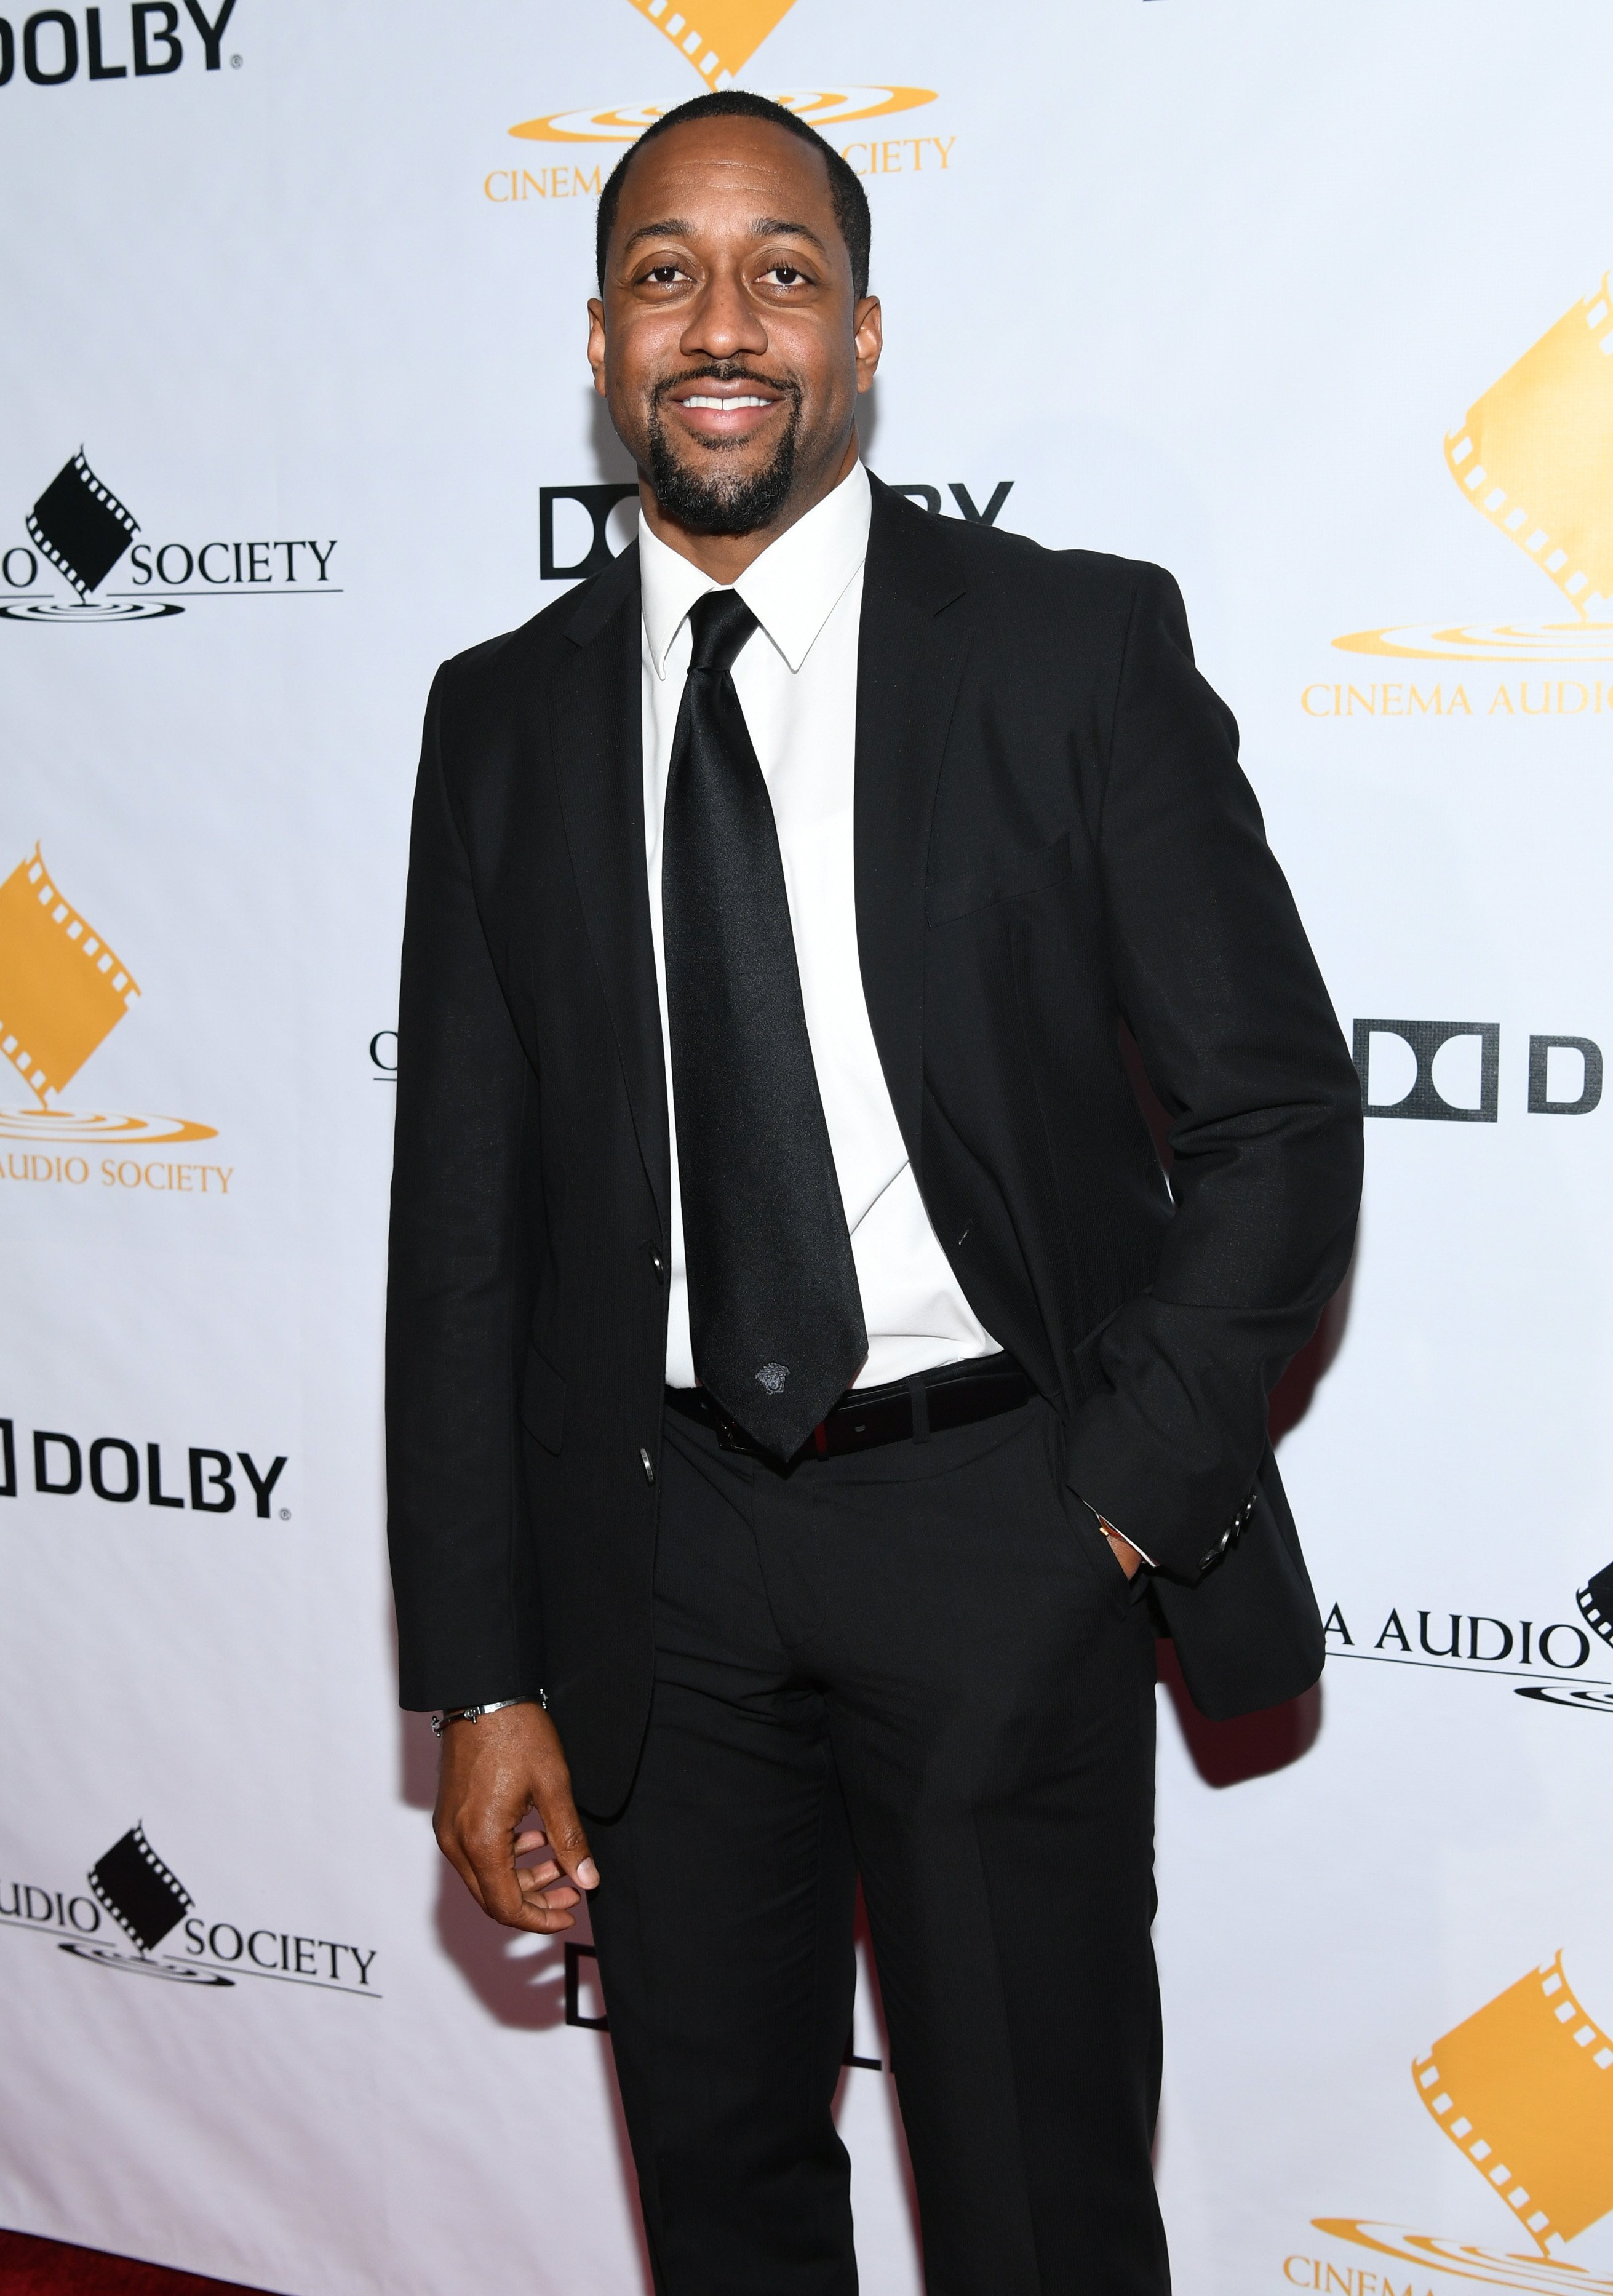 Jaleel White at the 54th annual Cinema Audio Society Awards in February 2018. | Photo: Getty Images